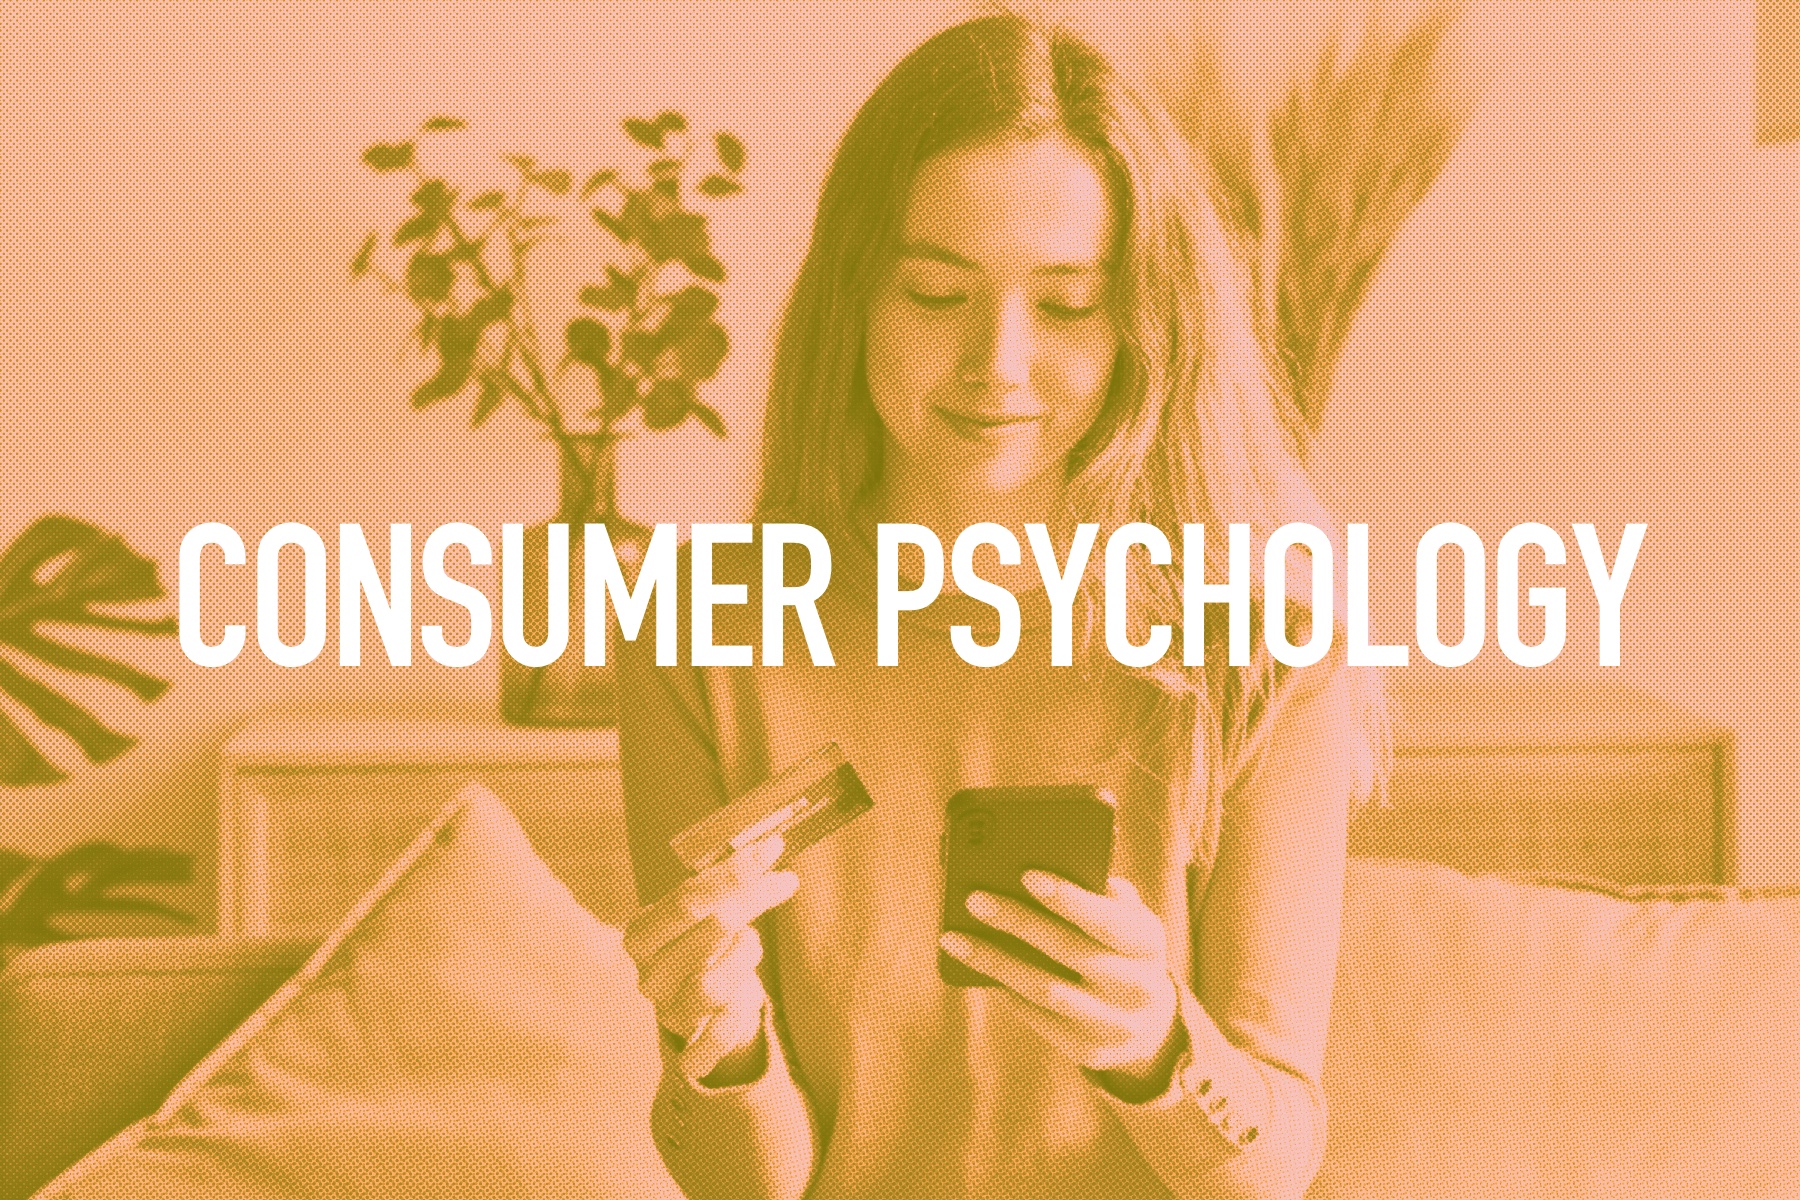 What are the most effective ways to use consumer psychology in marketing and advertising?